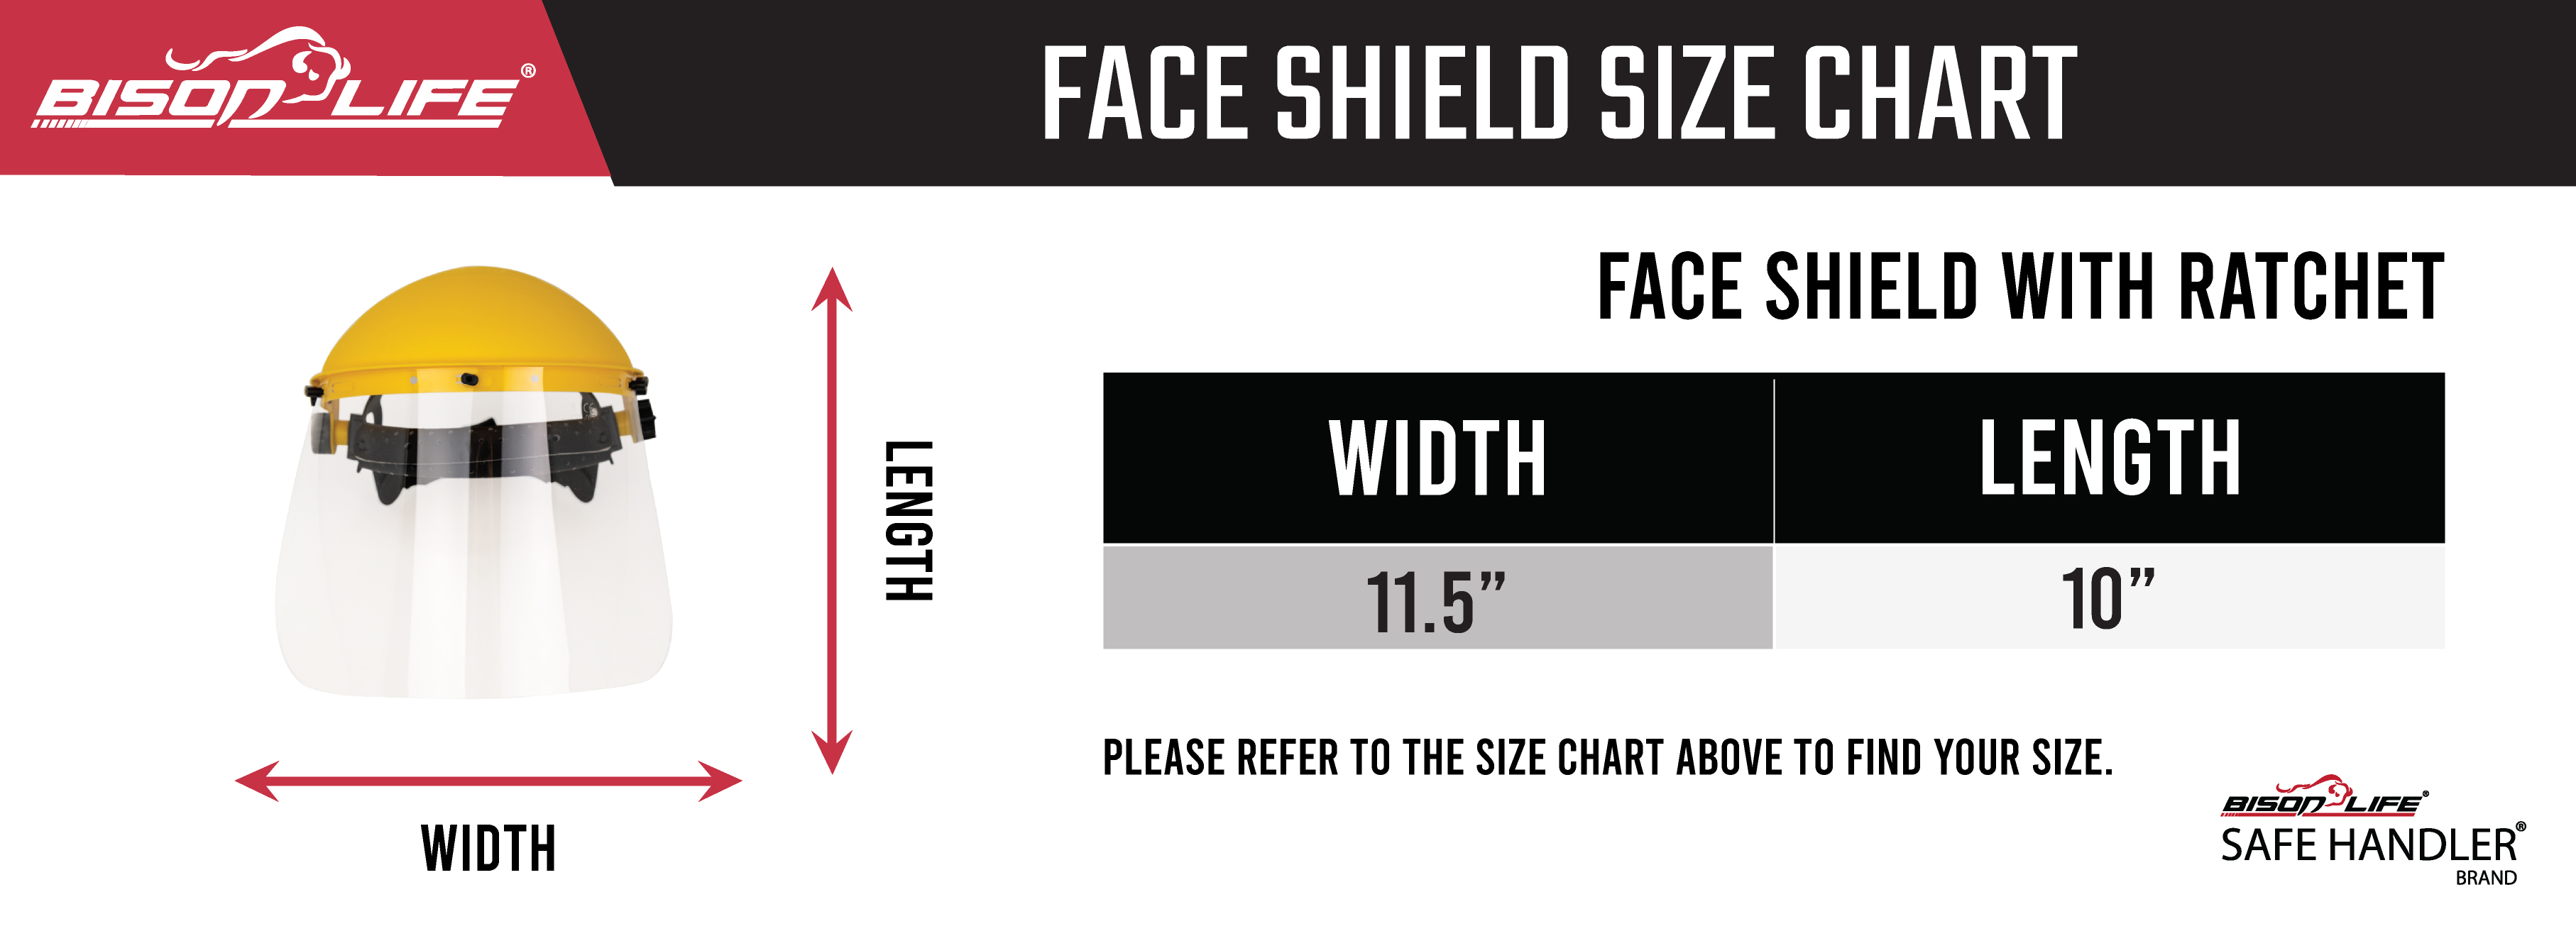 Safe Handler Face Shield with Ratchet Size Chart